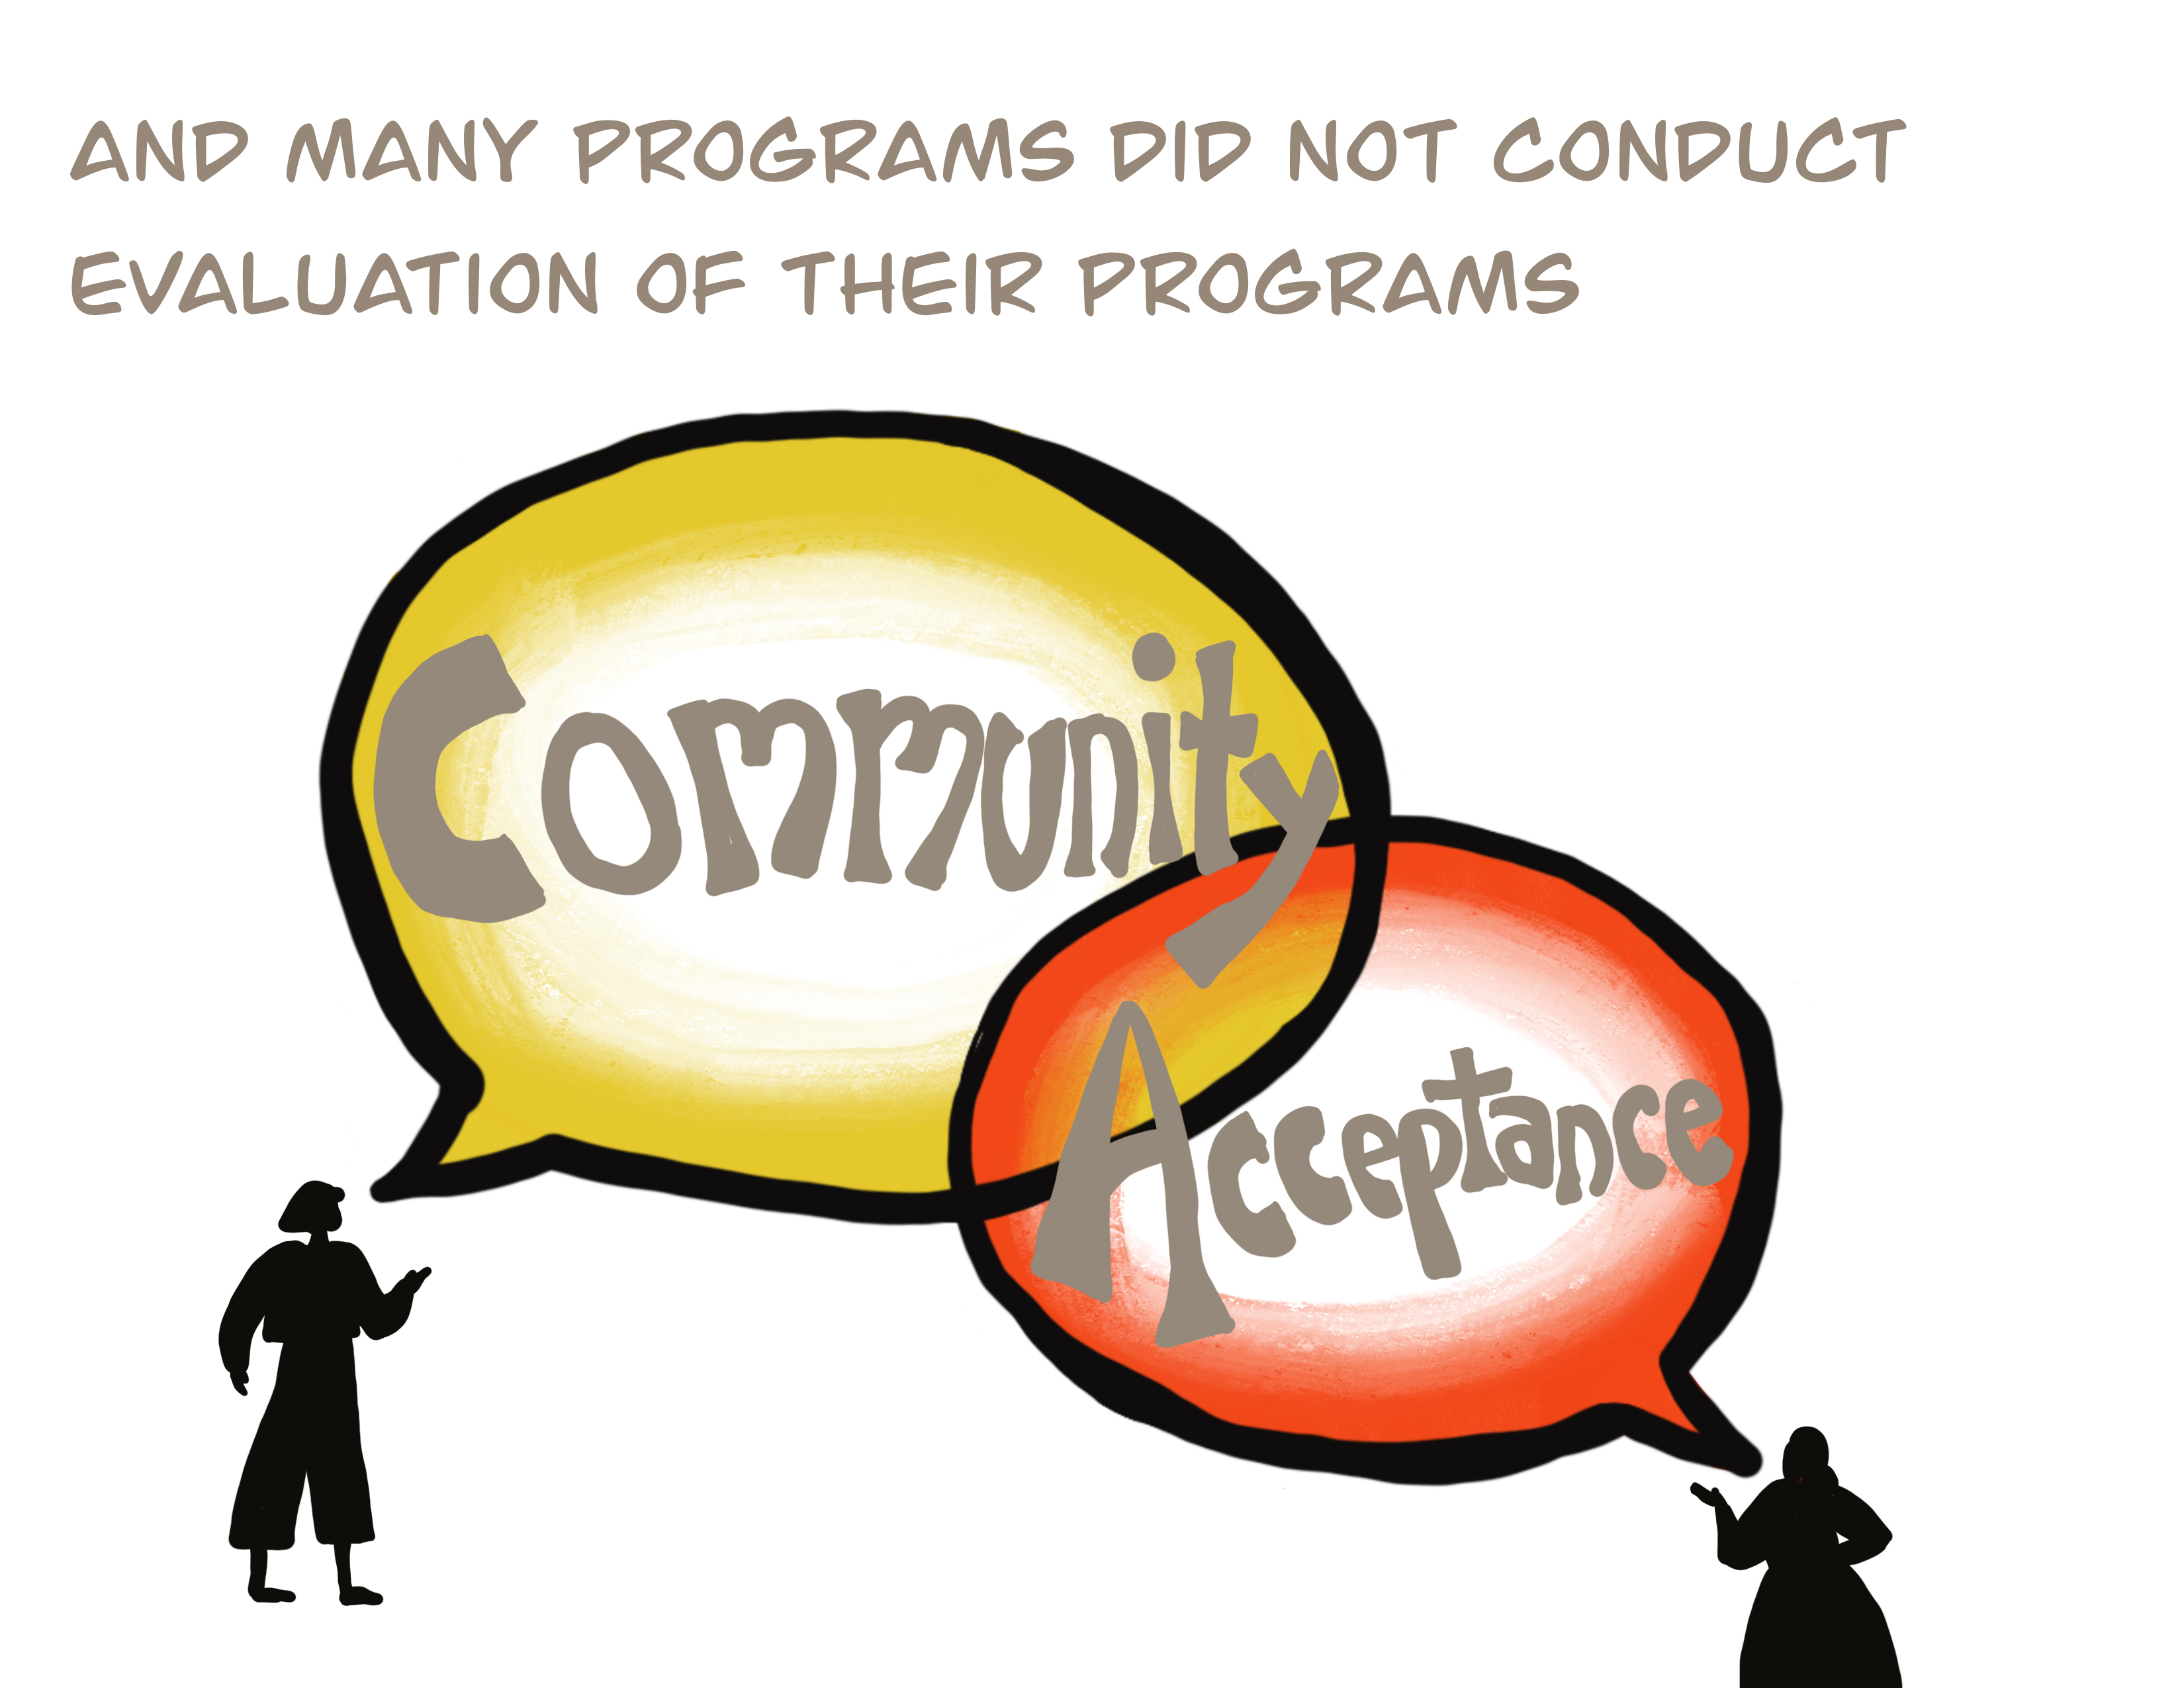 And many programs did not conduct evaluation of their programs (Community acceptance)